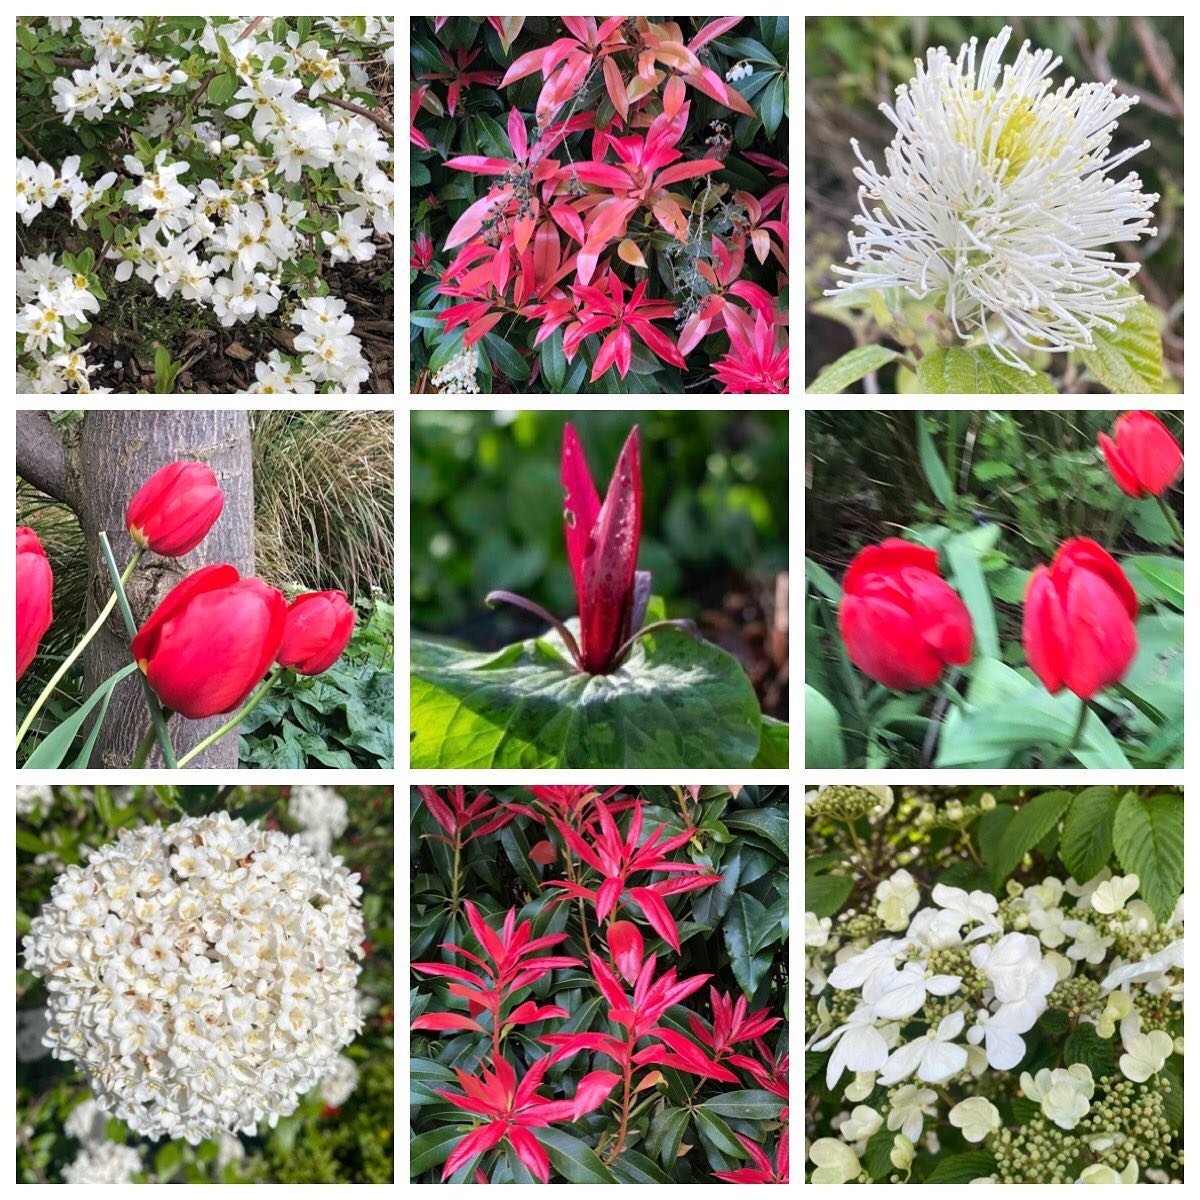 Some reds and whites in #sheffieldbotanicalgardens for St George&rsquo;s Day today.
📷middle pic by Rod Egglestone
.
.
.
.
.
.
#stgeorgesday #redandwhiteflowers #